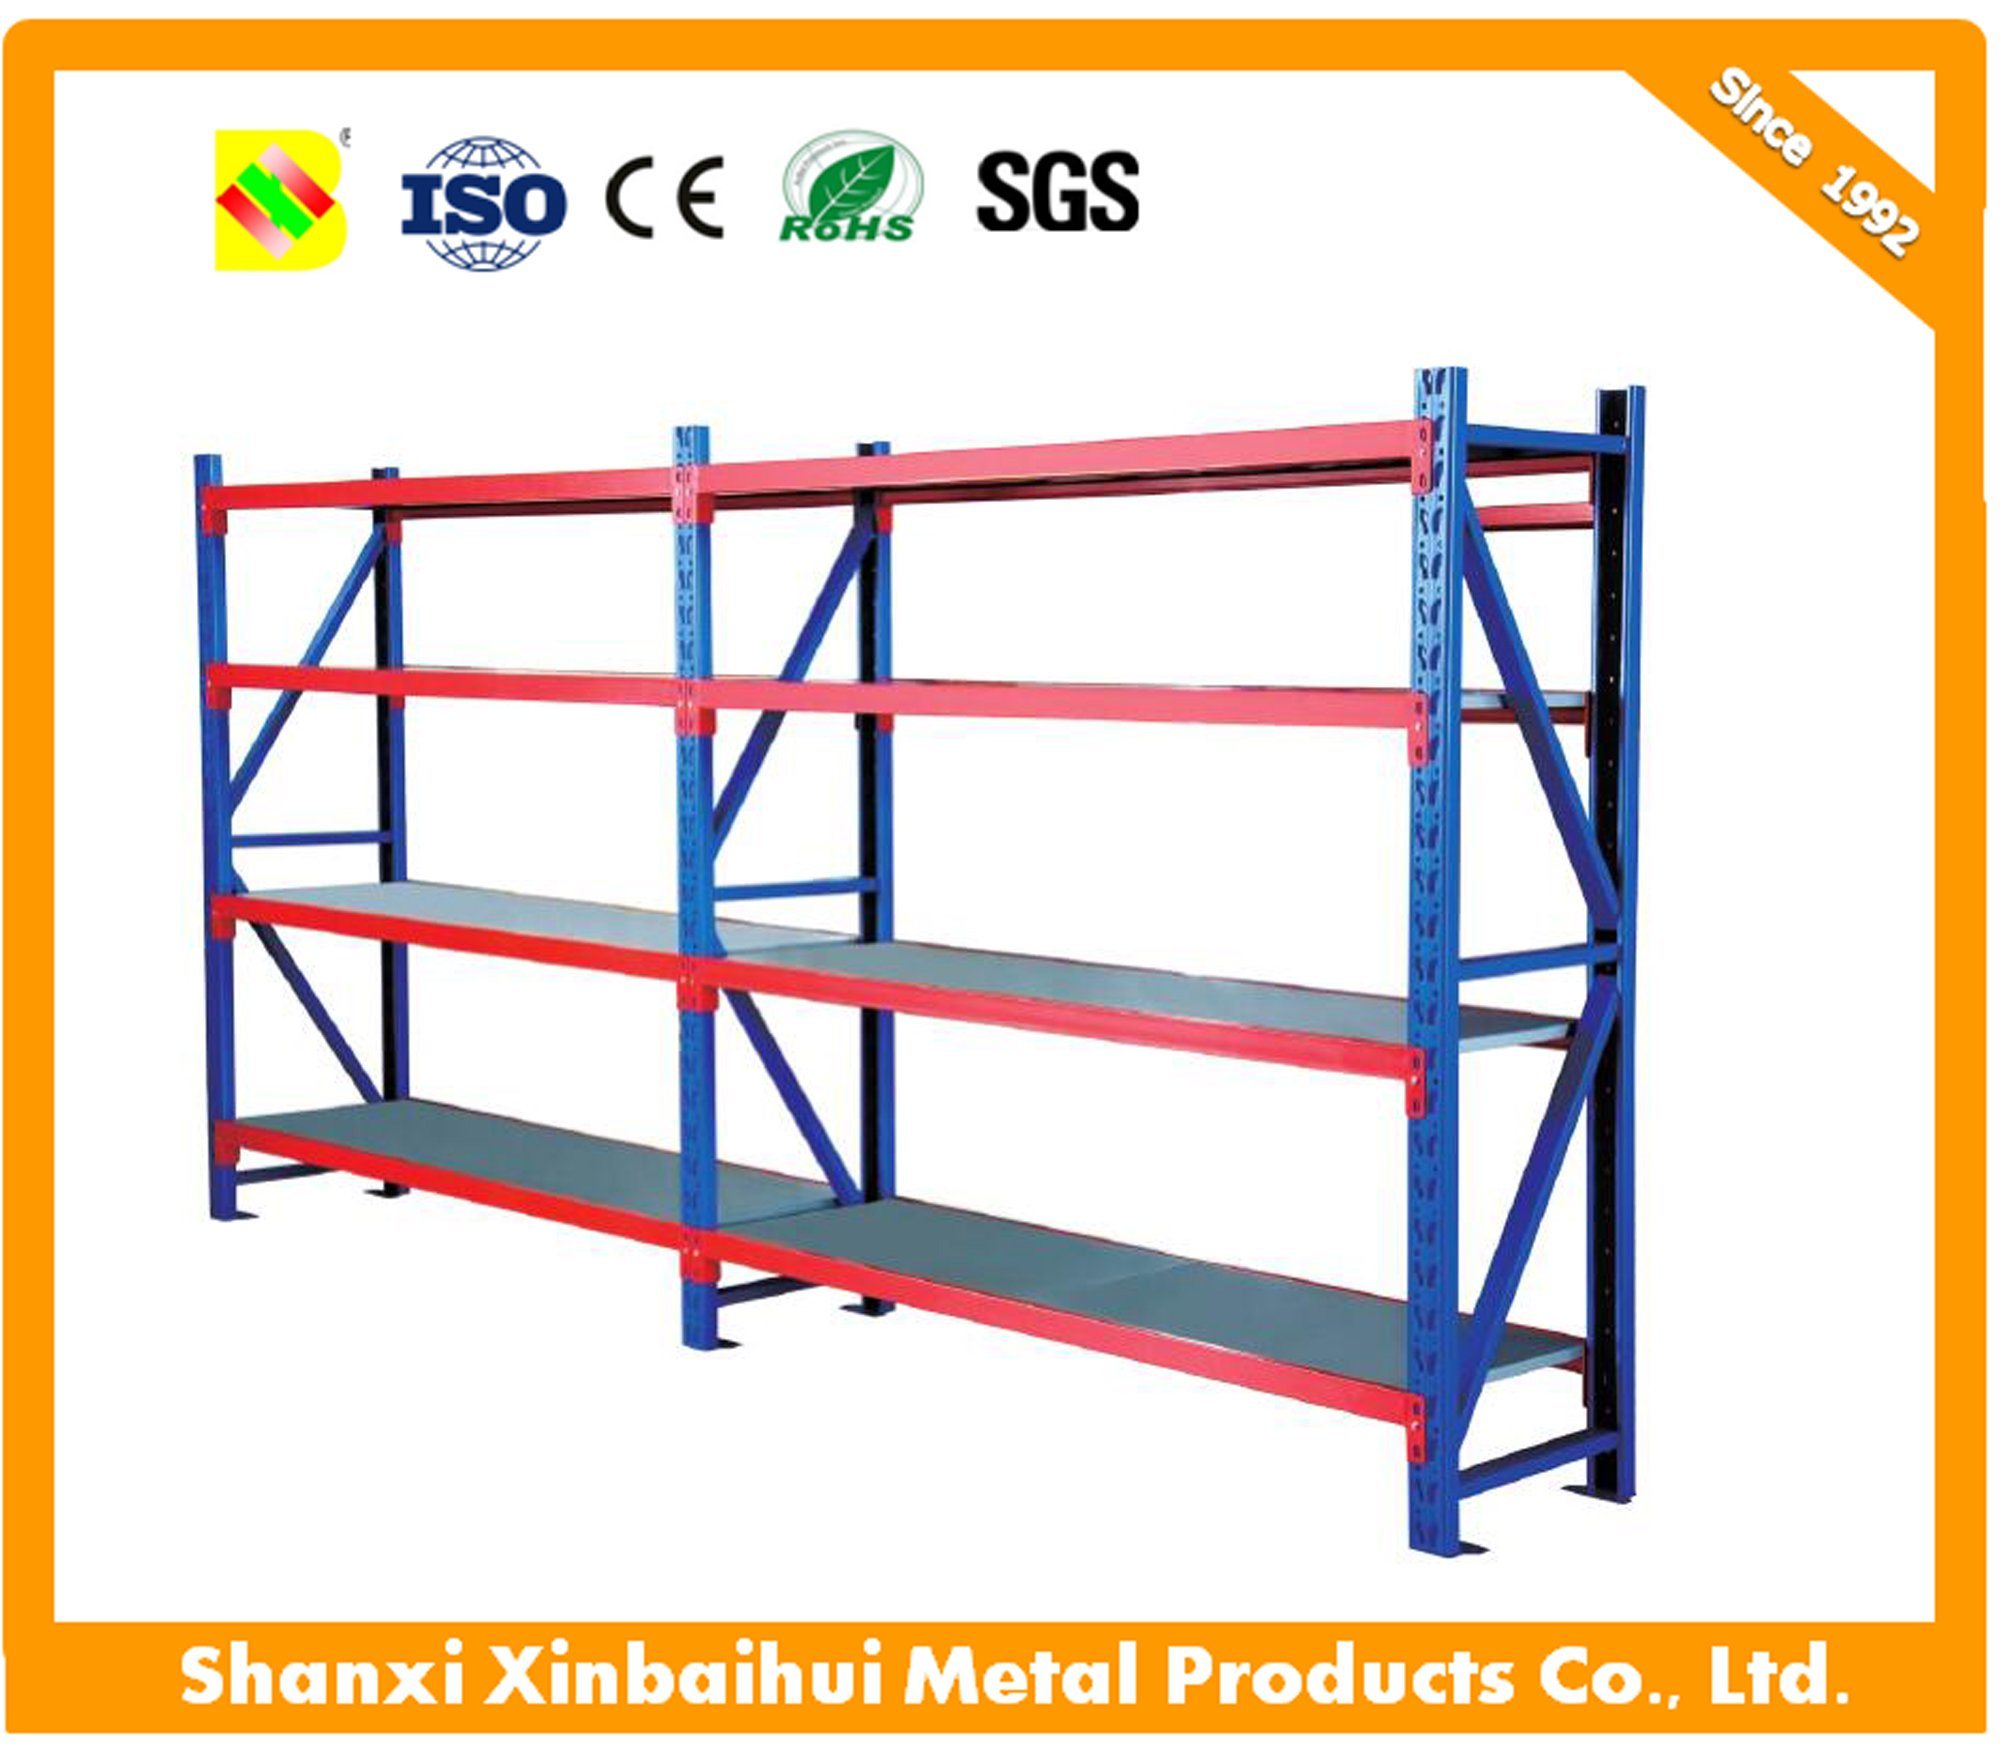 Suitable Storage Rack China Supplier as Your Requirements